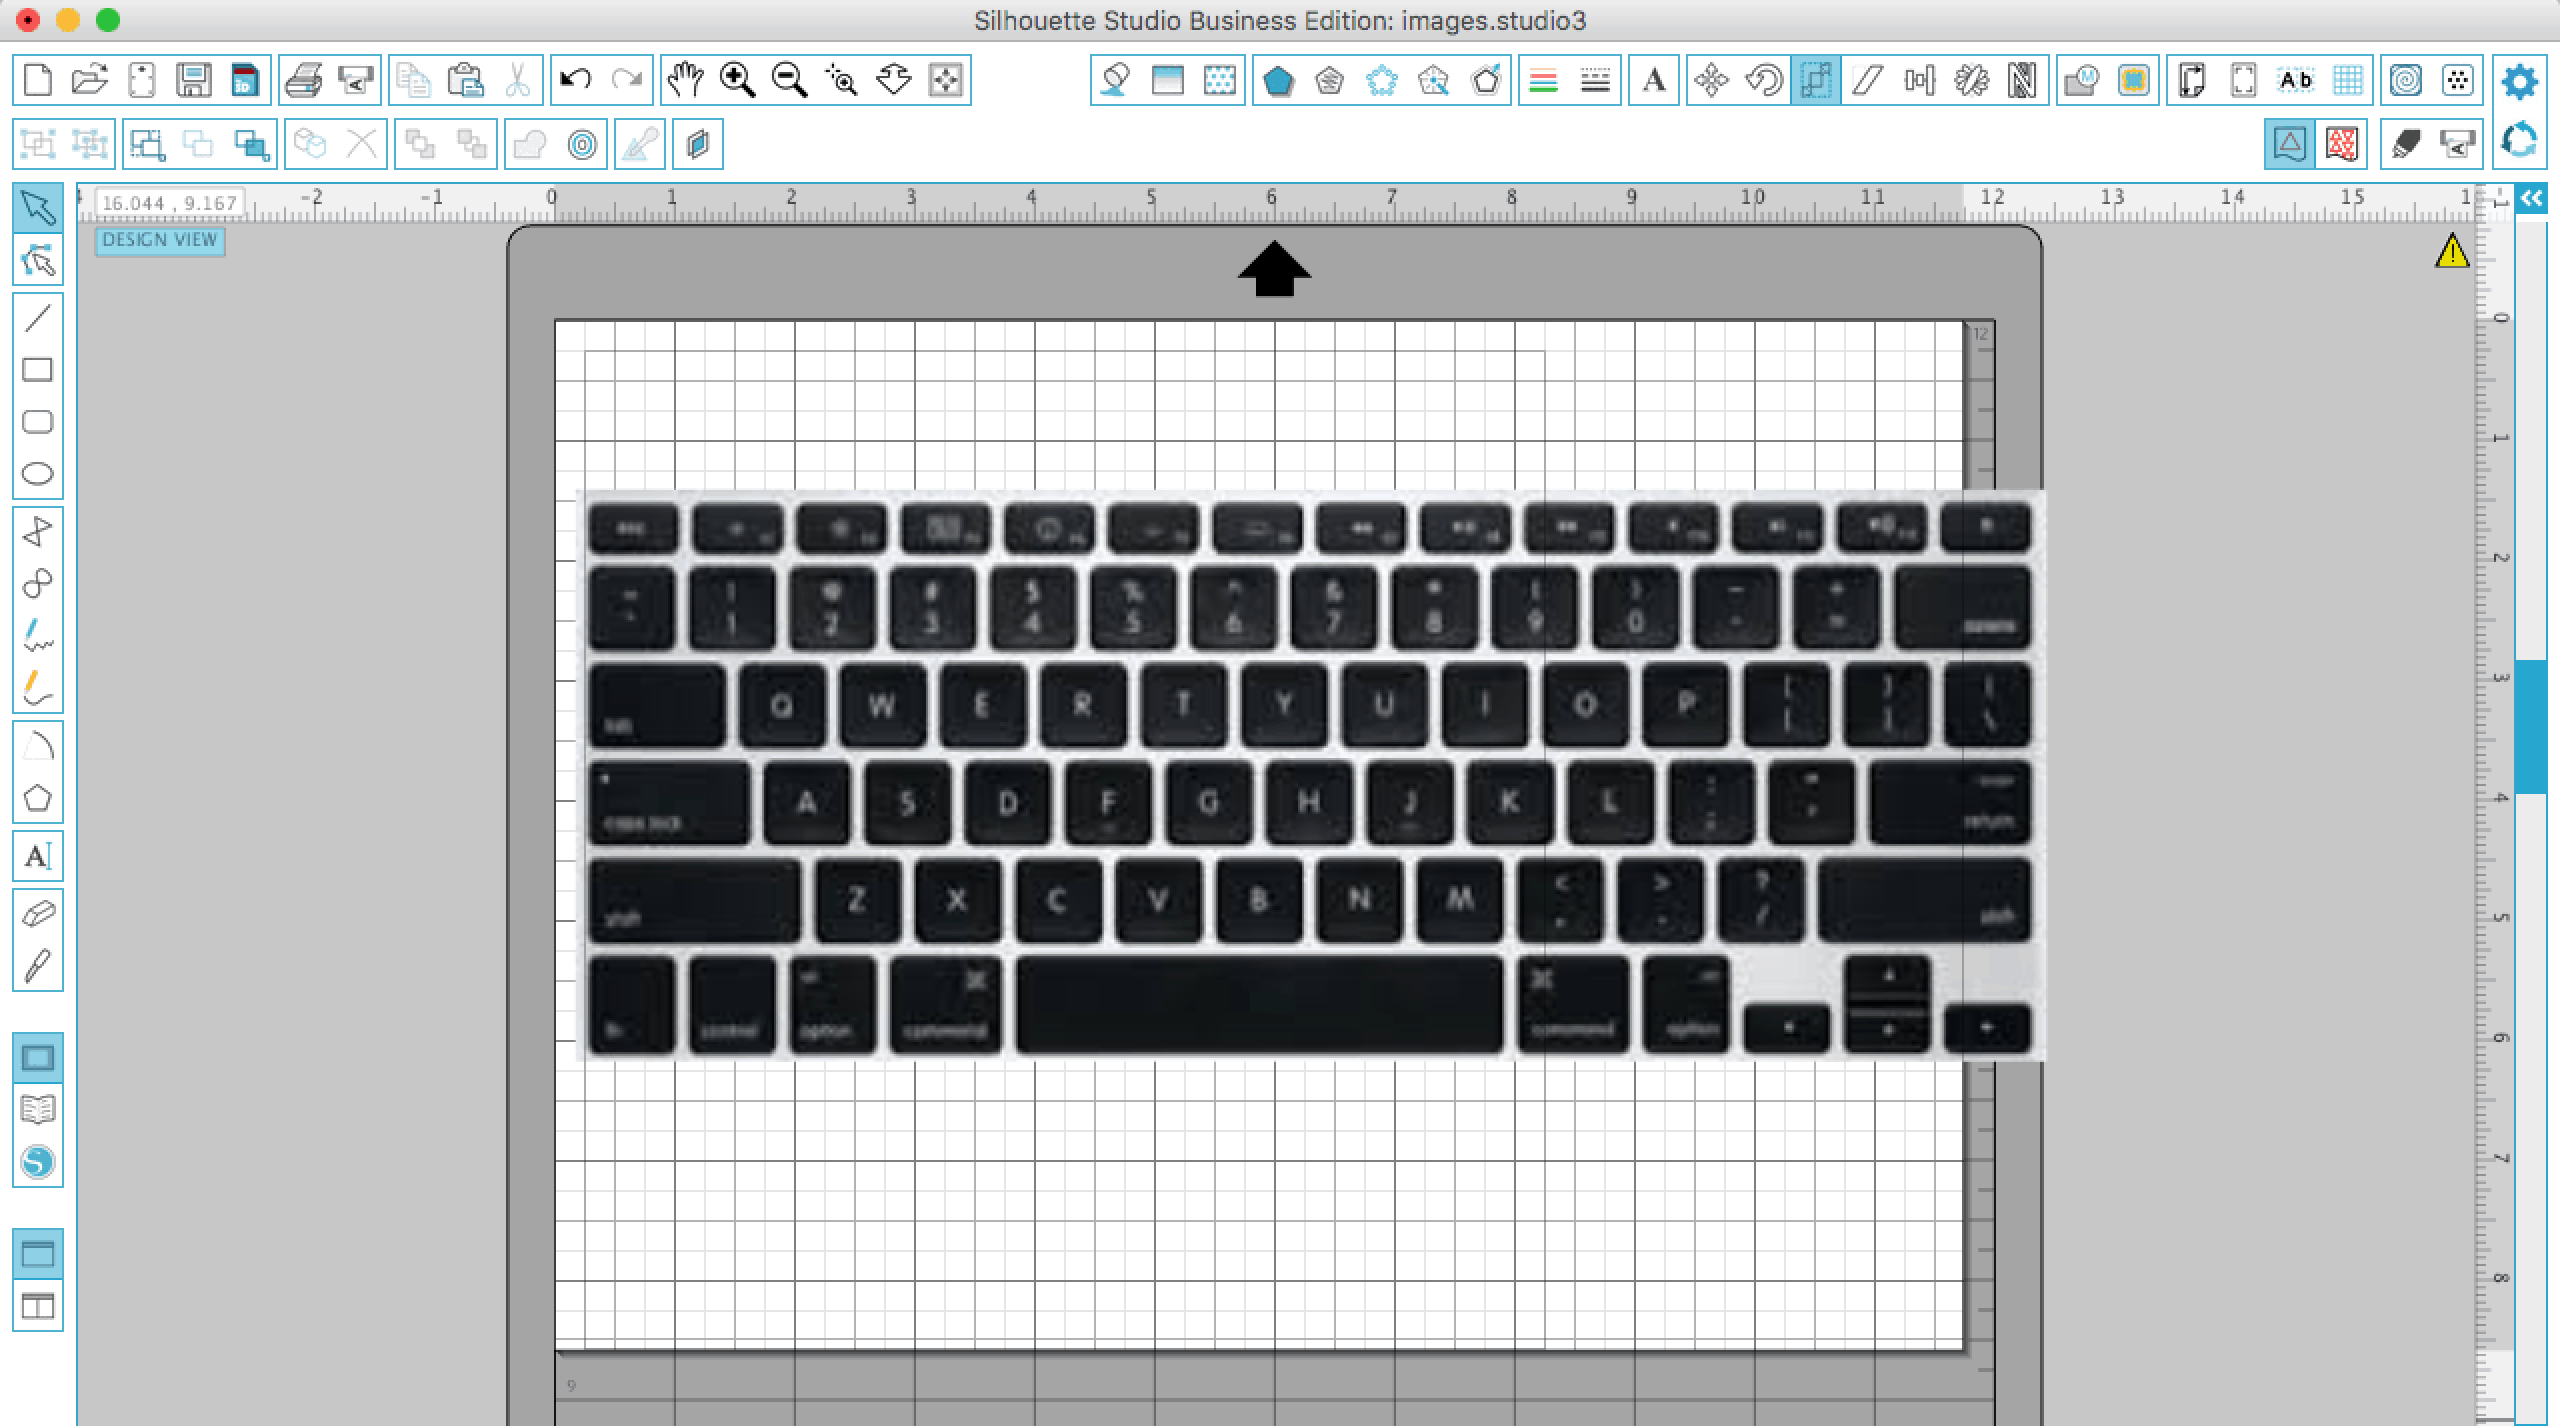 diy macbook keyboard skin with silhouette cameo by